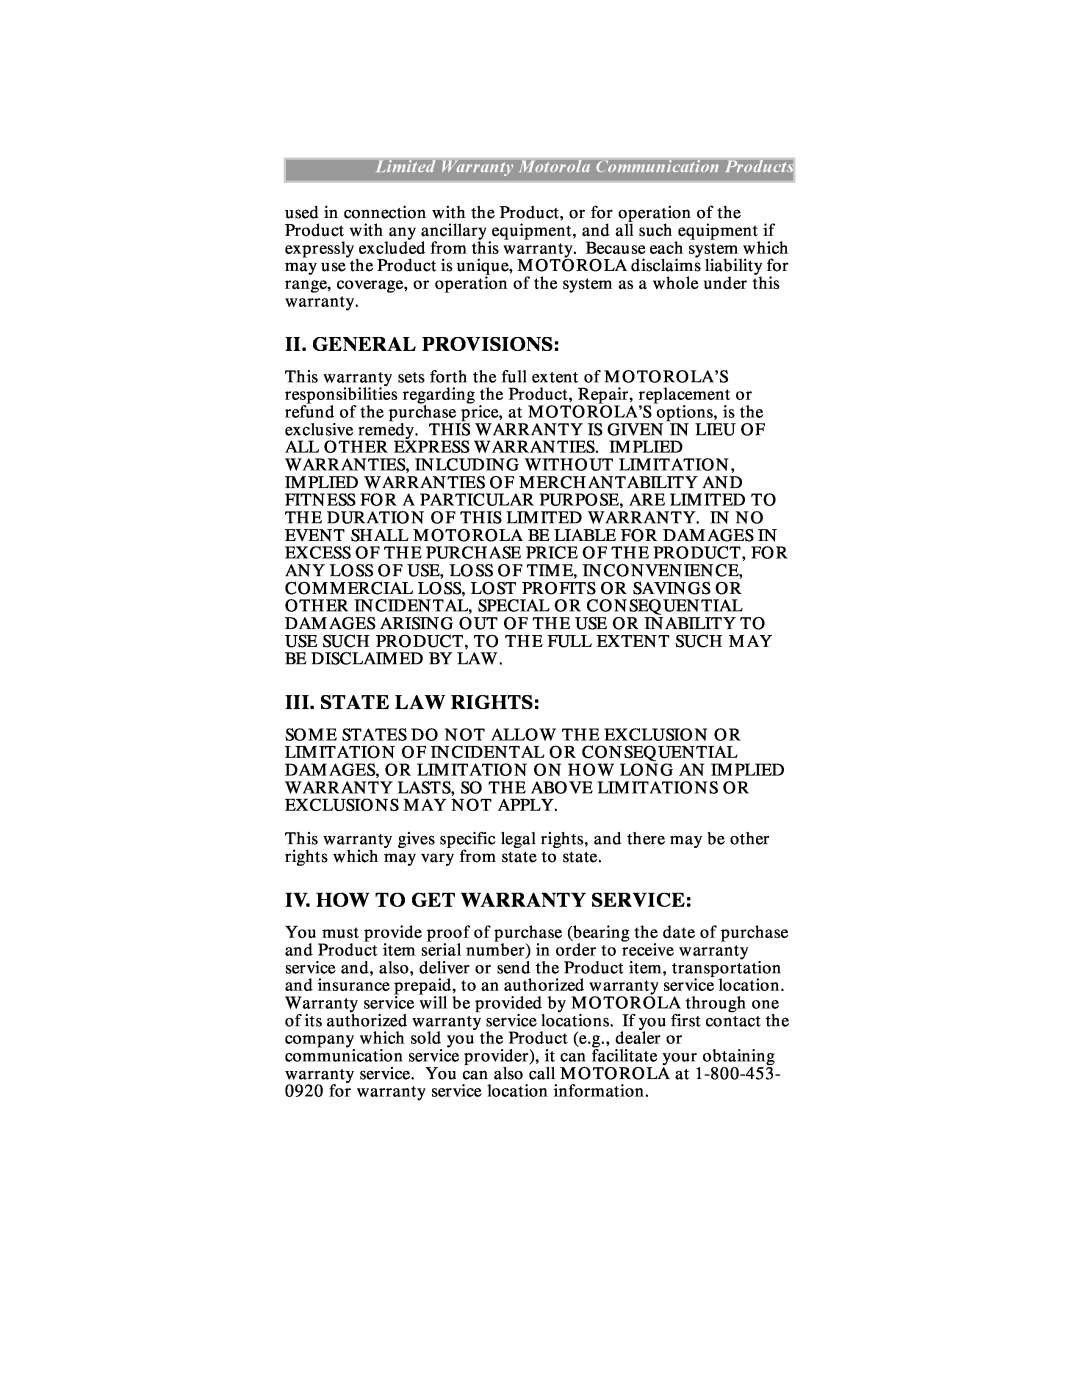 Motorola iDEN manual Ii. General Provisions, Iii. State Law Rights, Iv. How To Get Warranty Service 